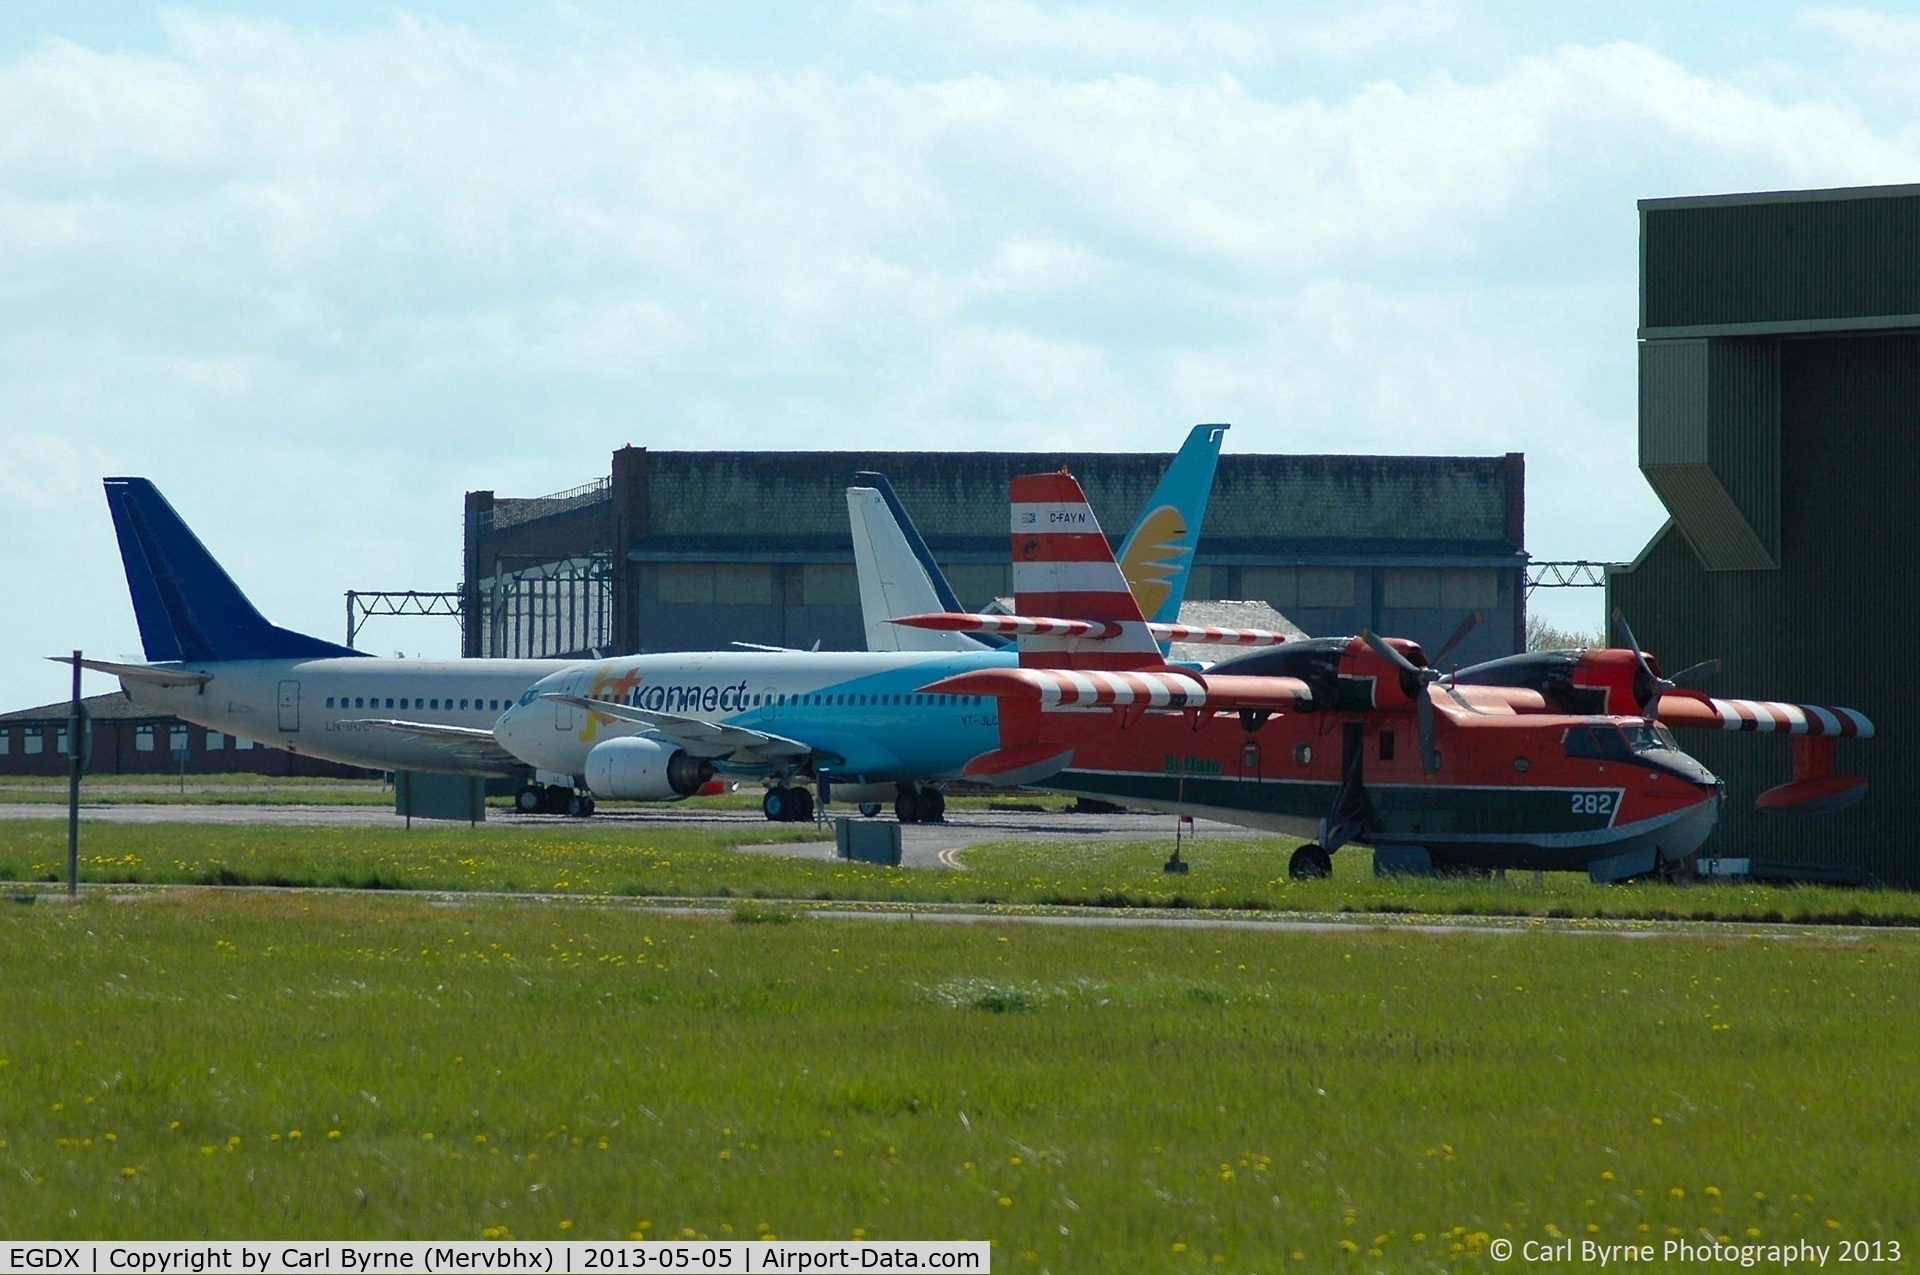 MoD Saint Athan Airport, St Athan, Wales United Kingdom (EGDX) - Some of the stored aircraft.